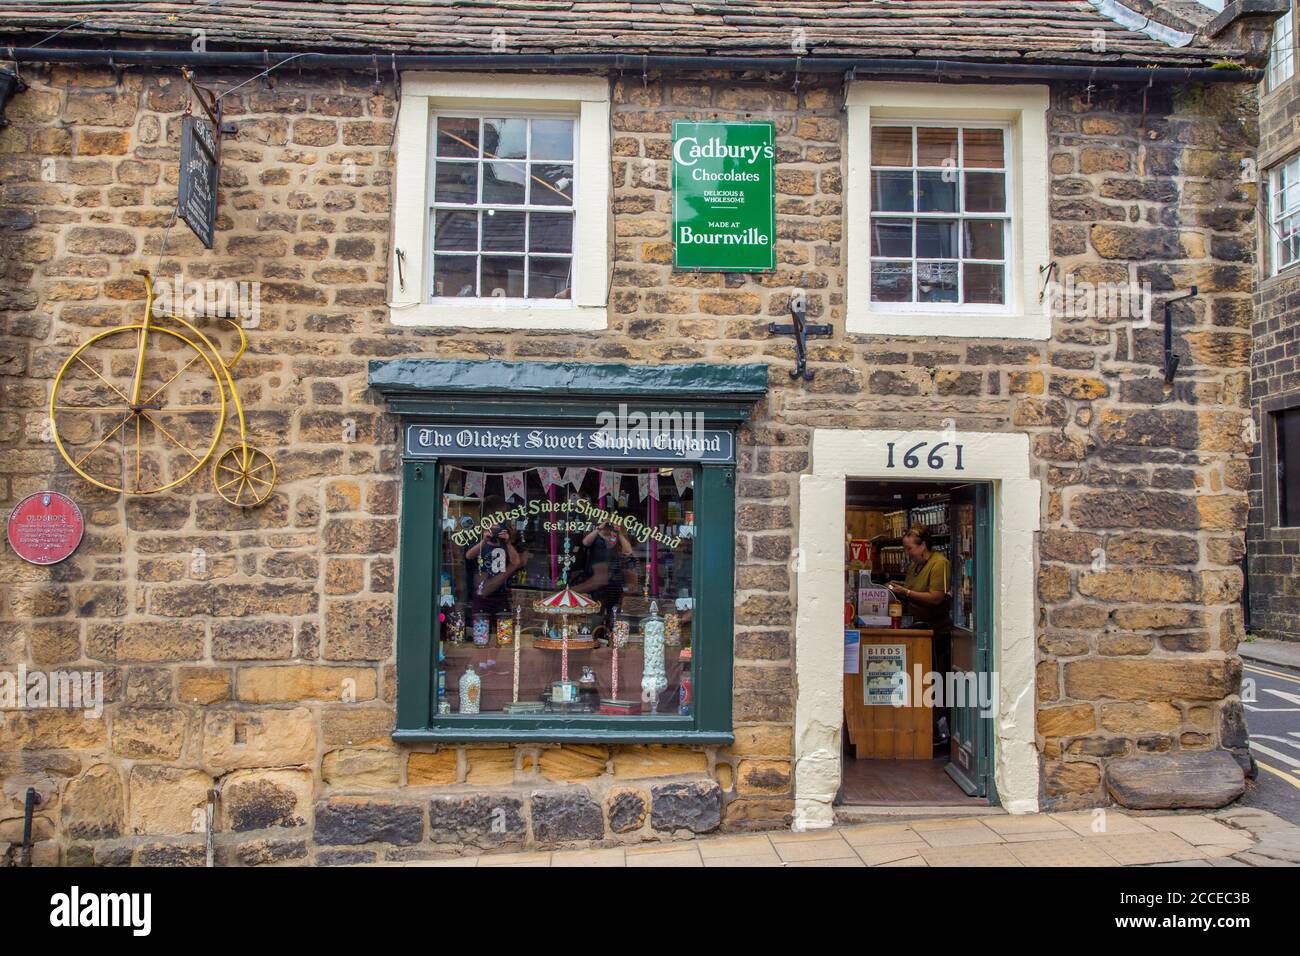 The oldest Sweet shop in England, Pateley Bridge town in Nidderdale AONB, Yorkshire, England Stock Photo